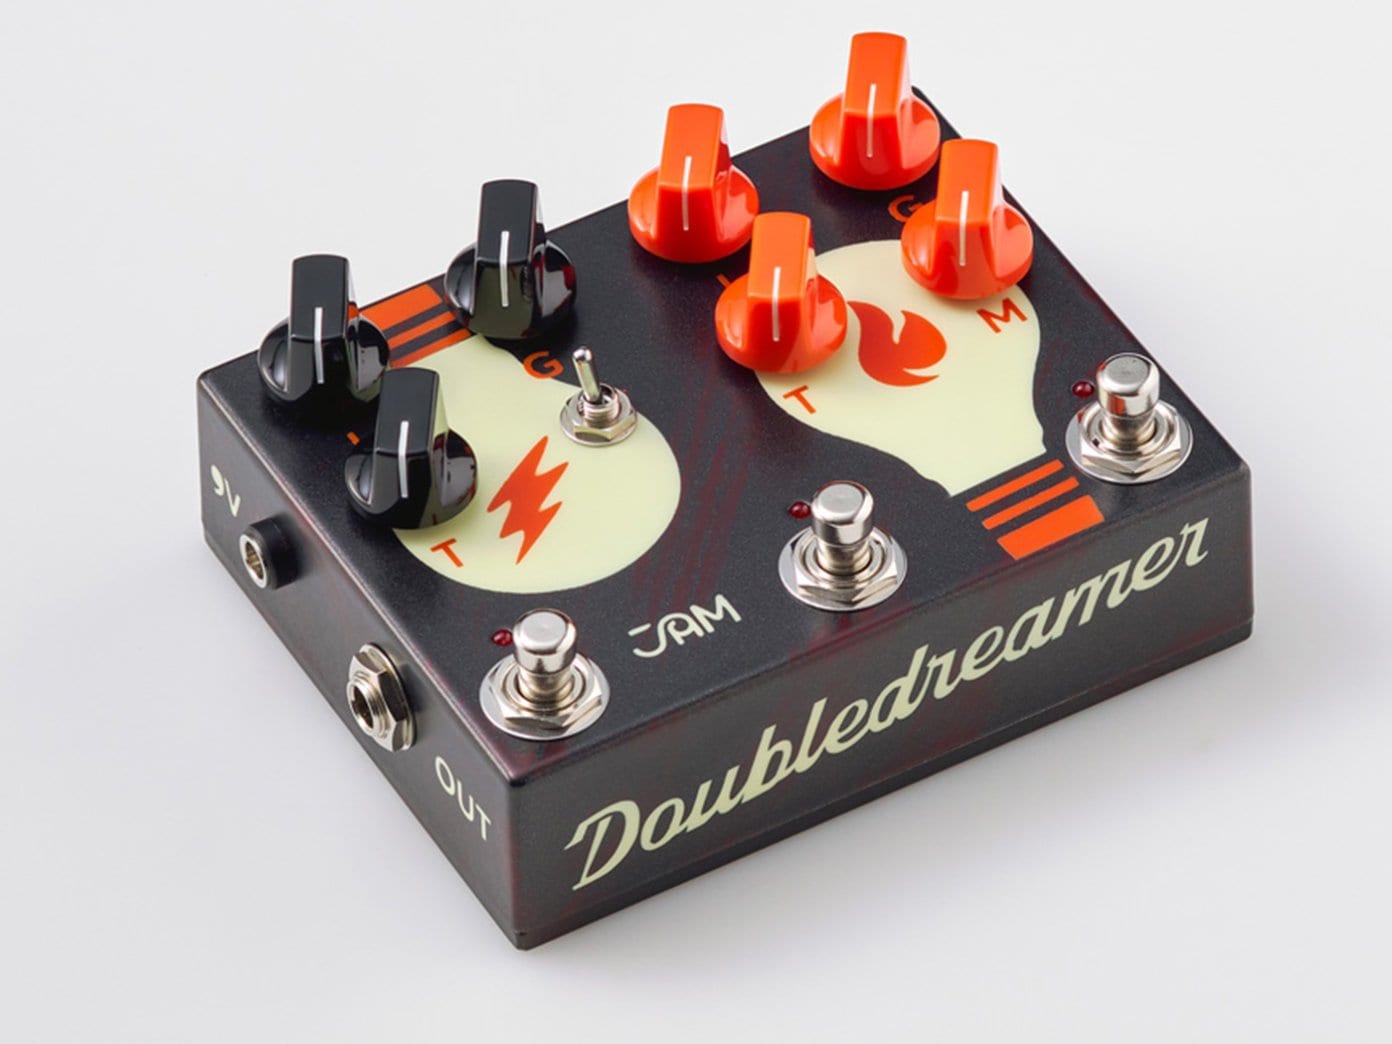 JAM Pedals Double Dreamer stacks two drives in one pedal